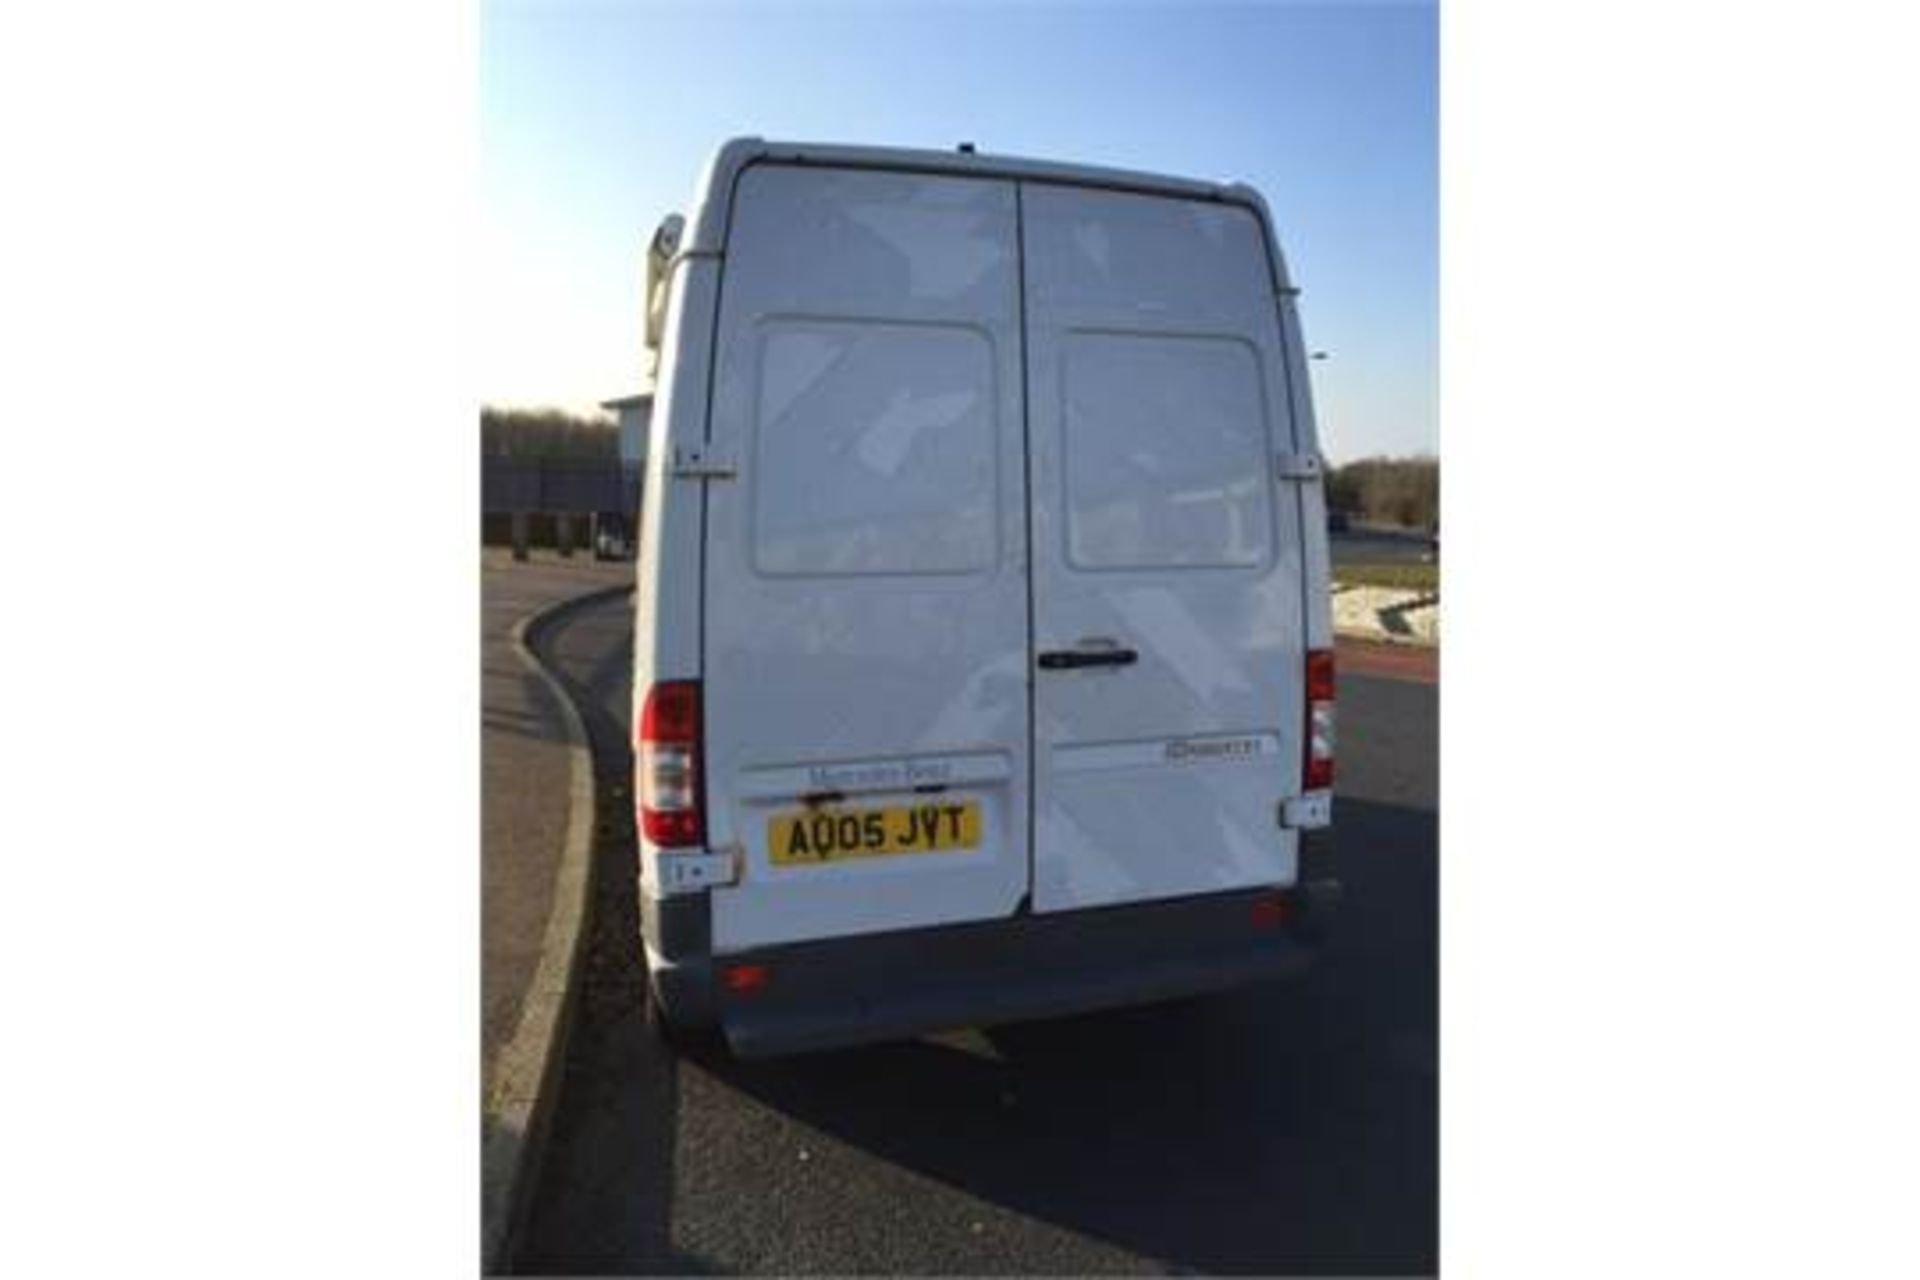 2005 Mercedes Sprinter 311 cdi 2148cc Diesel Van with side windows Owned and used by the police from - Image 6 of 23